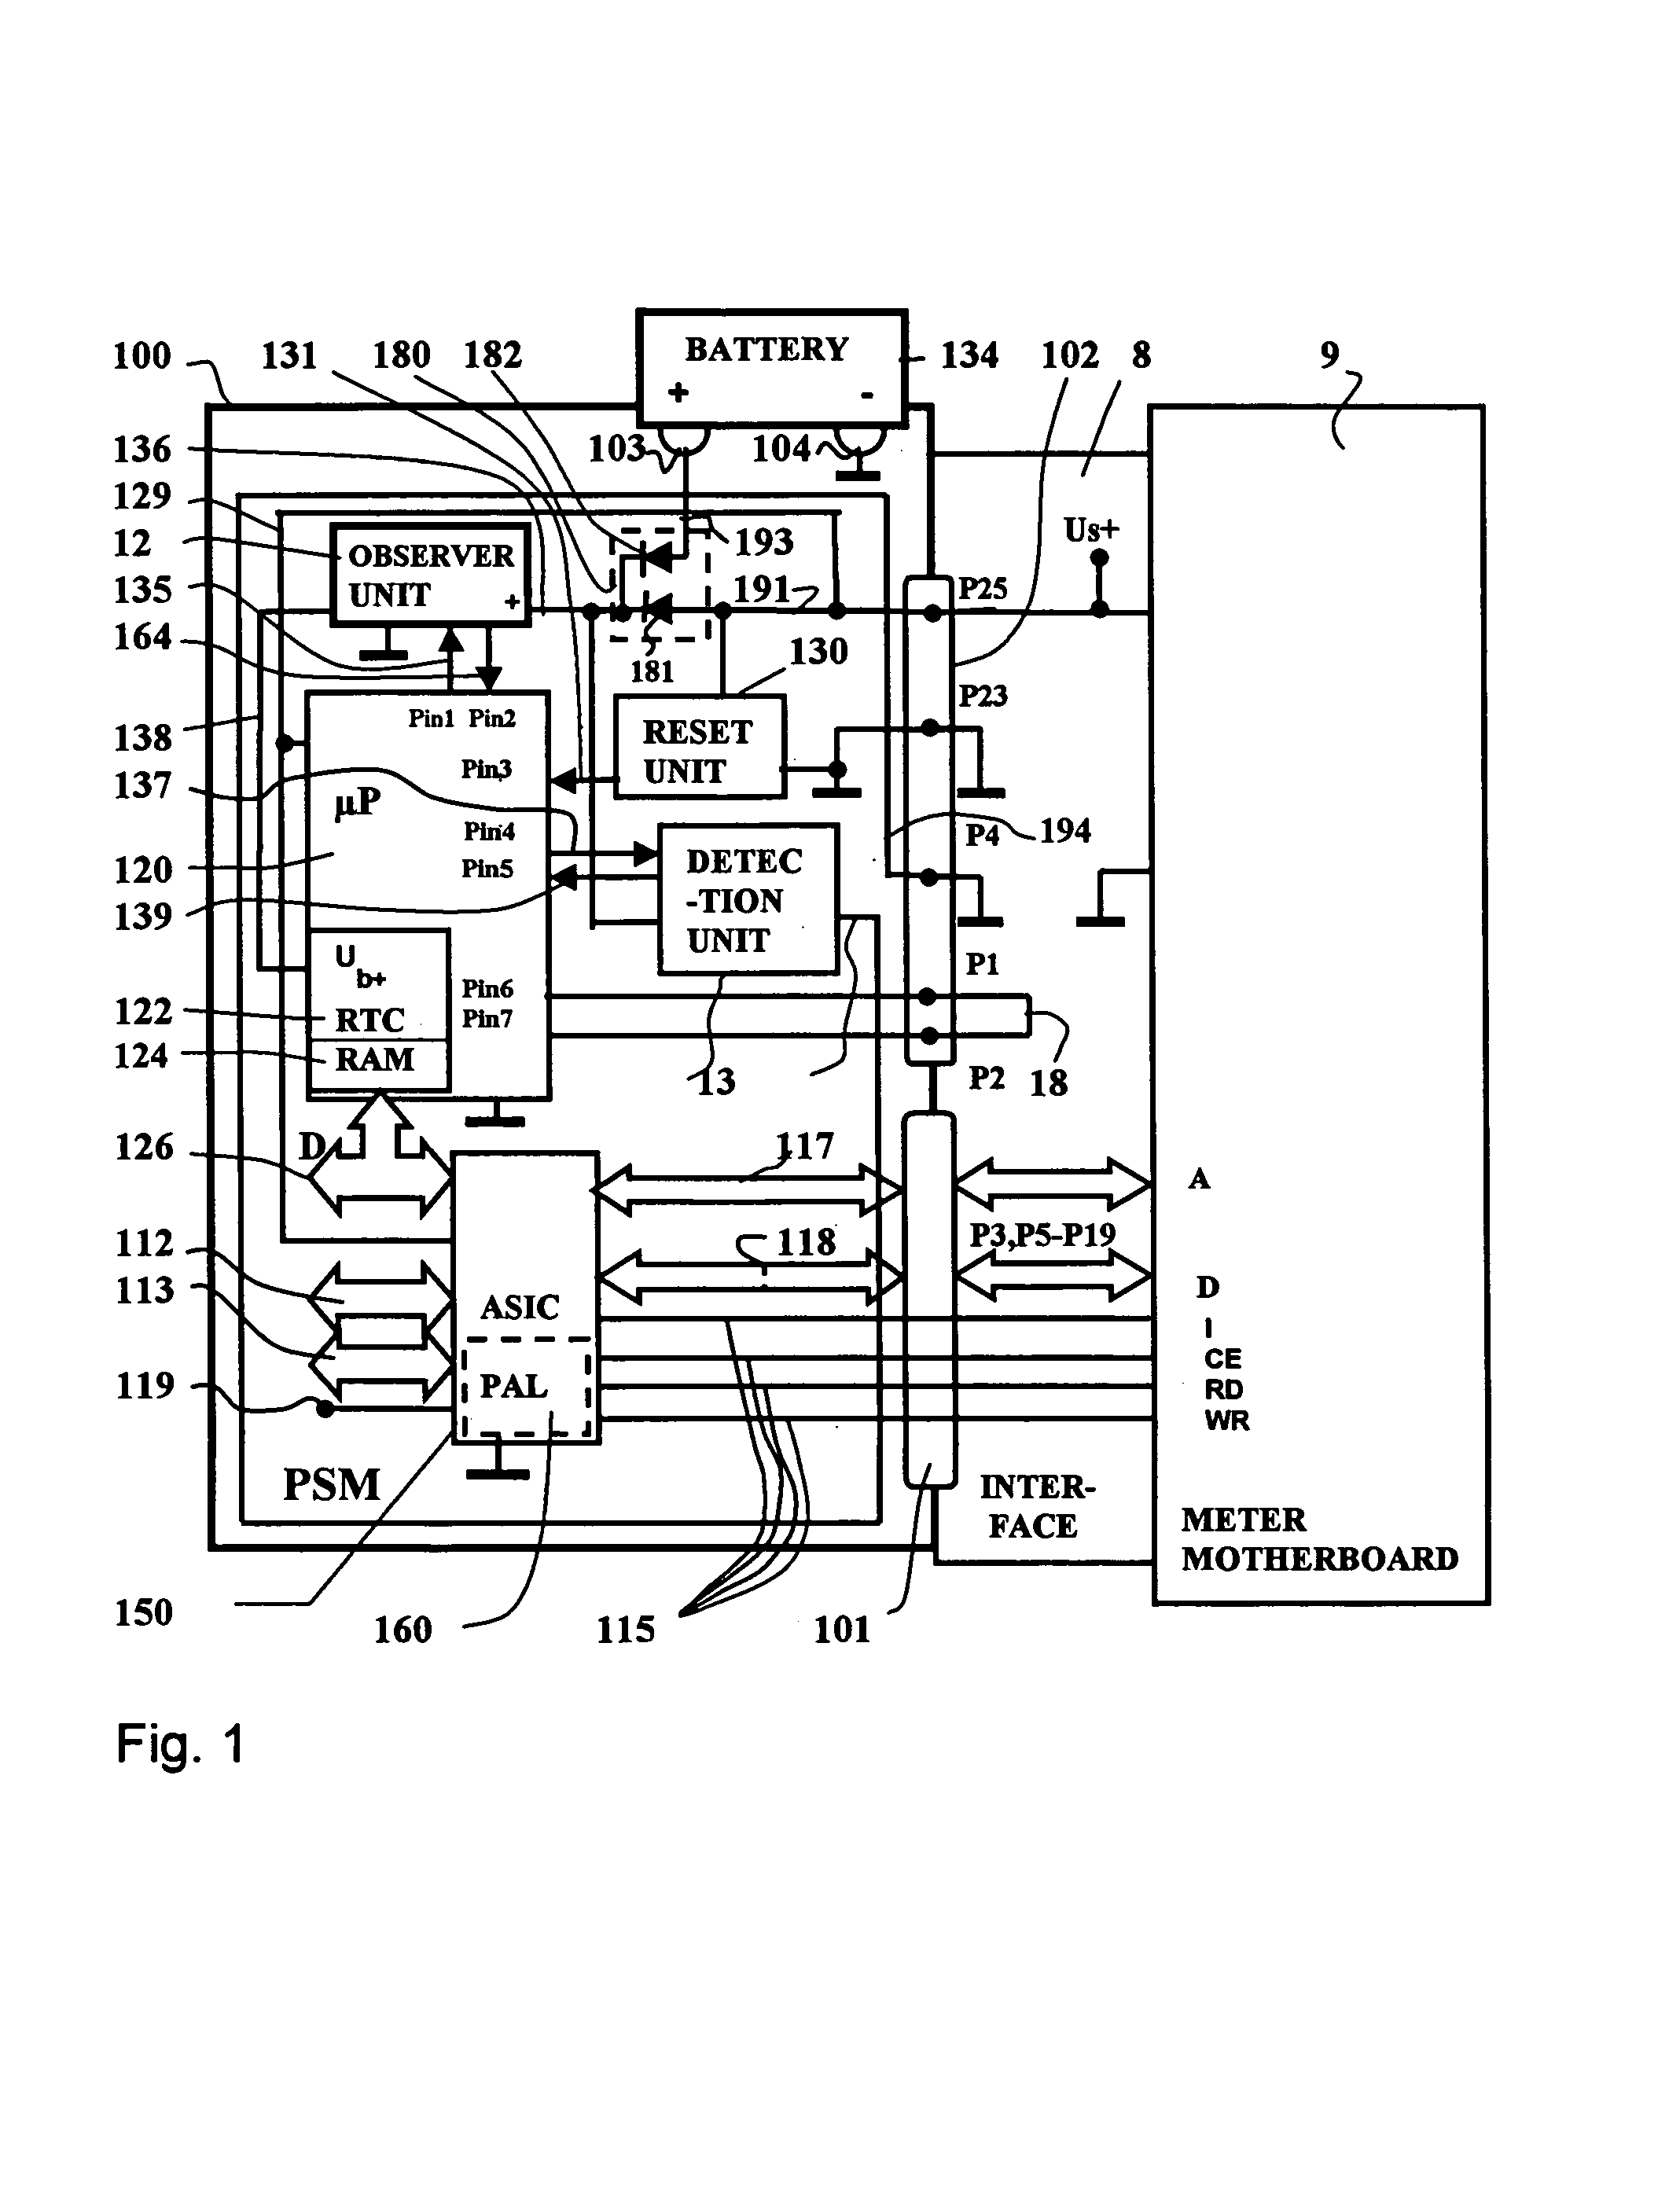 Method for protecting a security module and arrangement for the implementation of the method